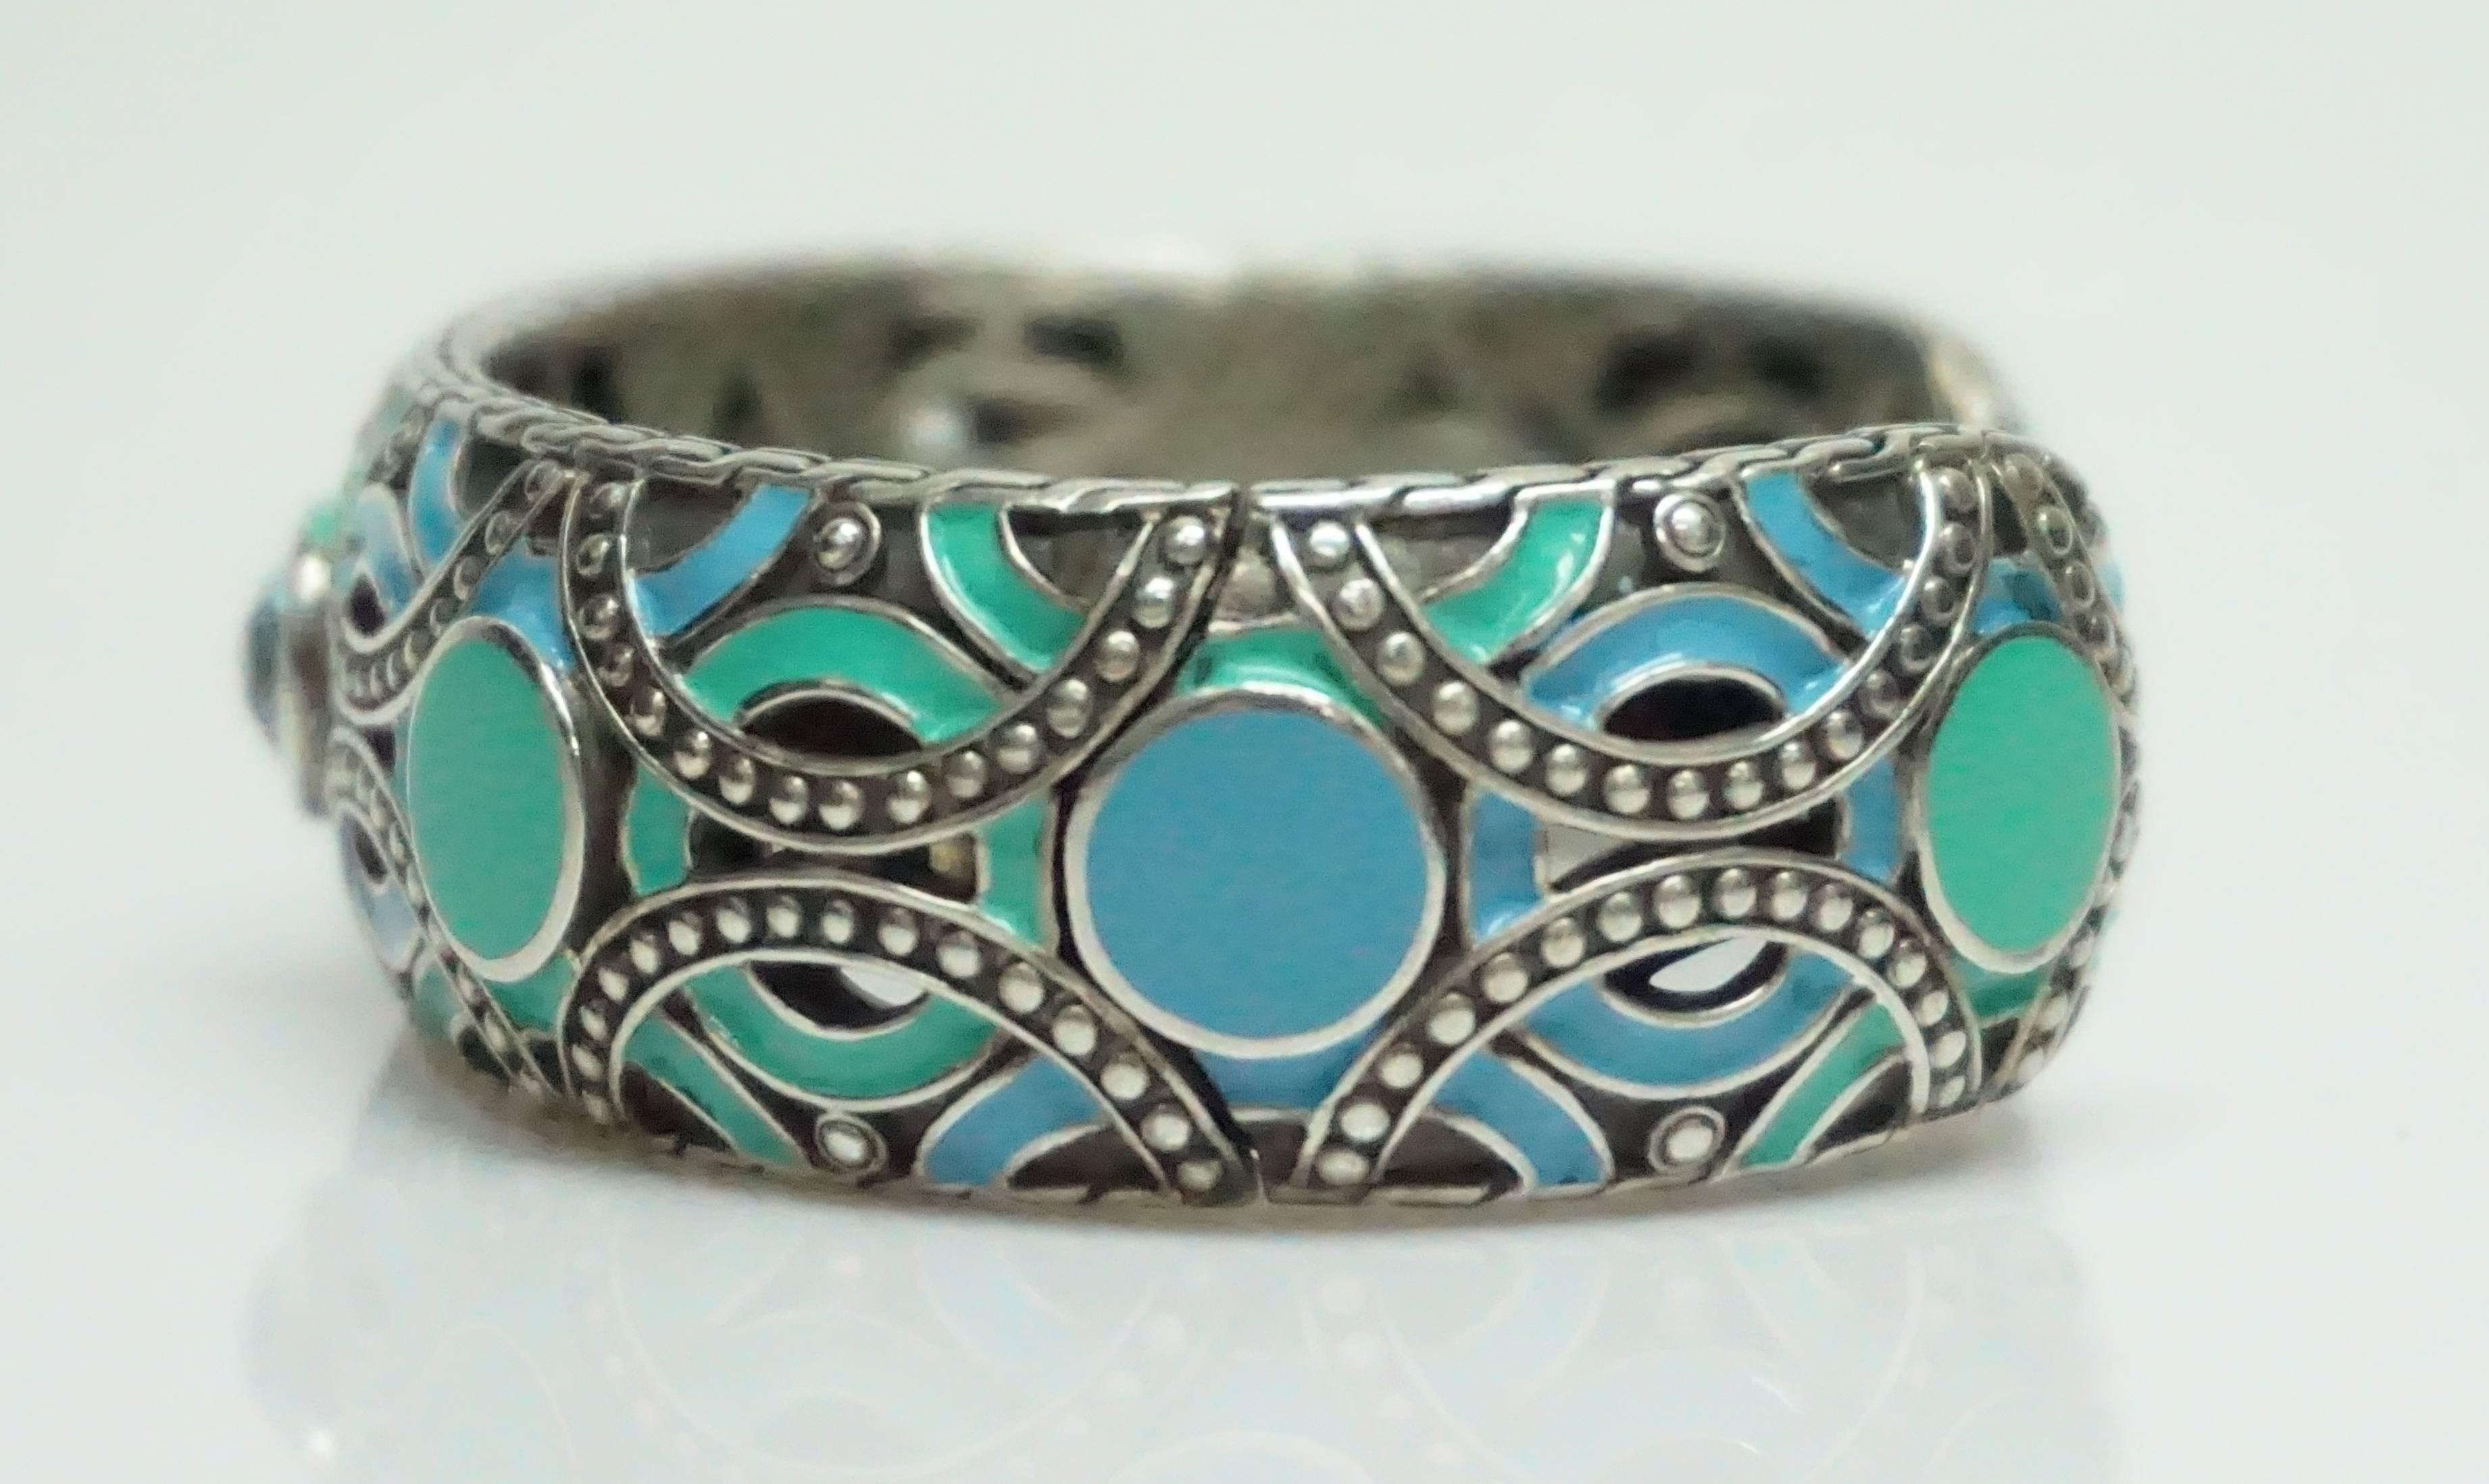 John Hardy Sterling Silver and Turq/Blue Enamel Bracelet w/ Blue Topaz  This beautiful sterling silver bracelet is in excellent condition. The bracelet has circular and half circle details throughout. The outside of the bracelet has turquoise